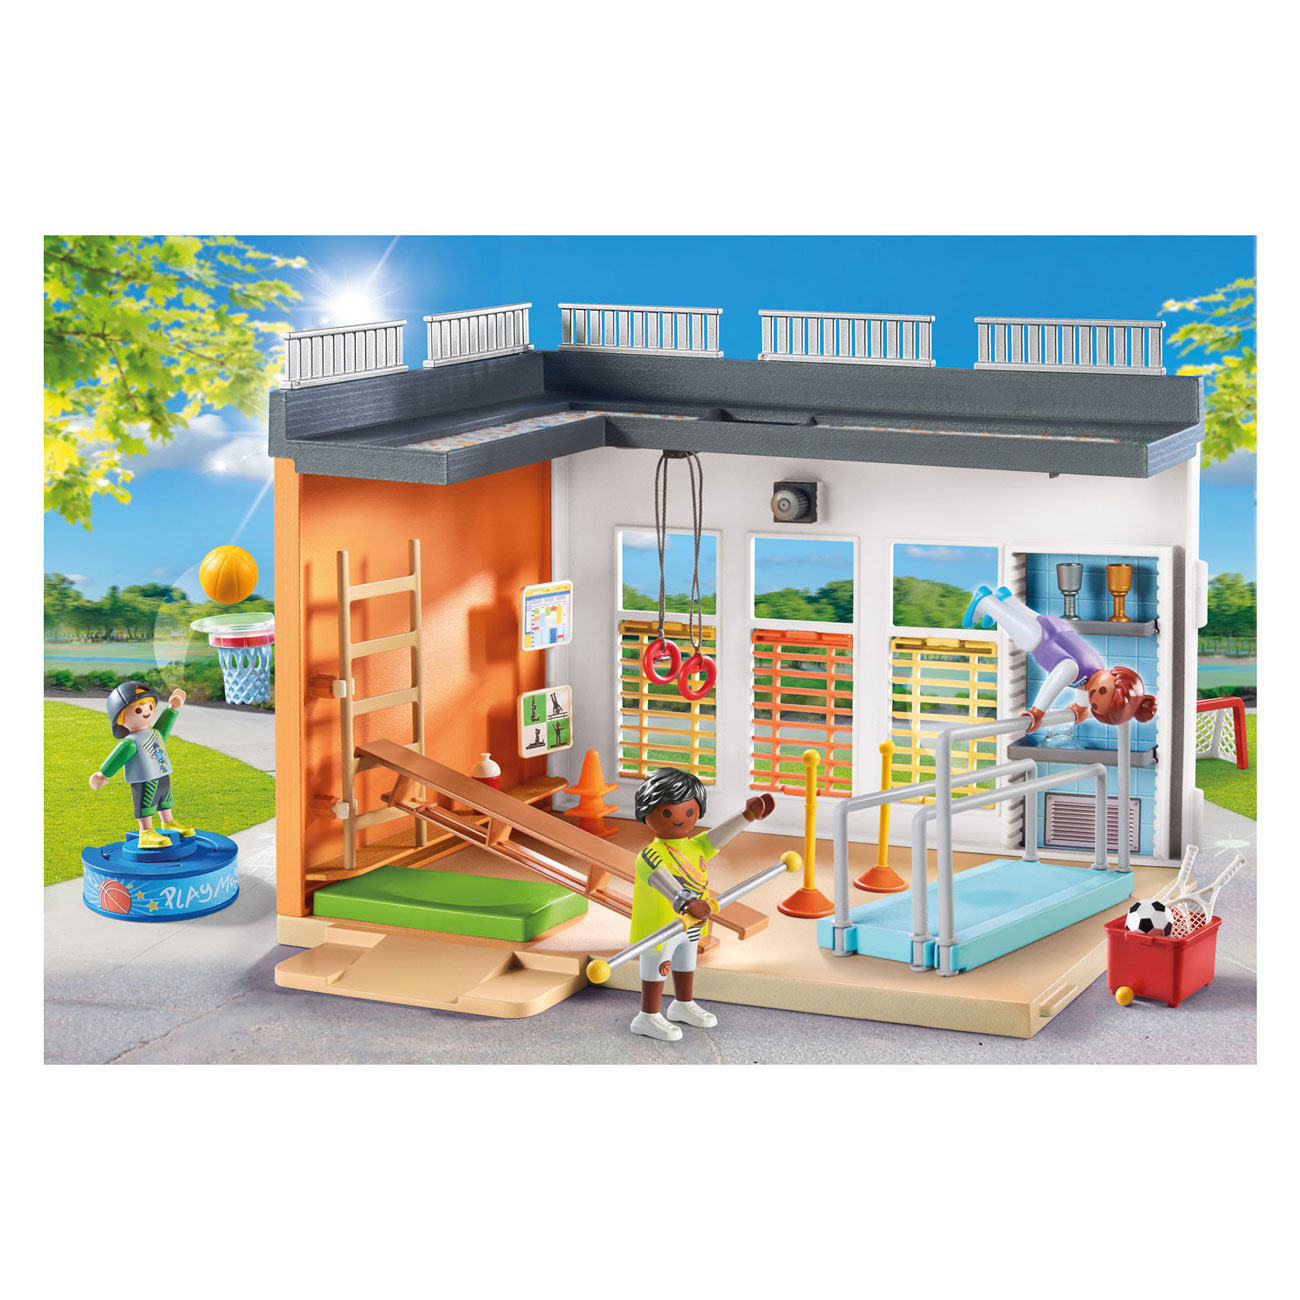 PLAYMOBIL City Life Fitness Room Play Set 5578 for sale online